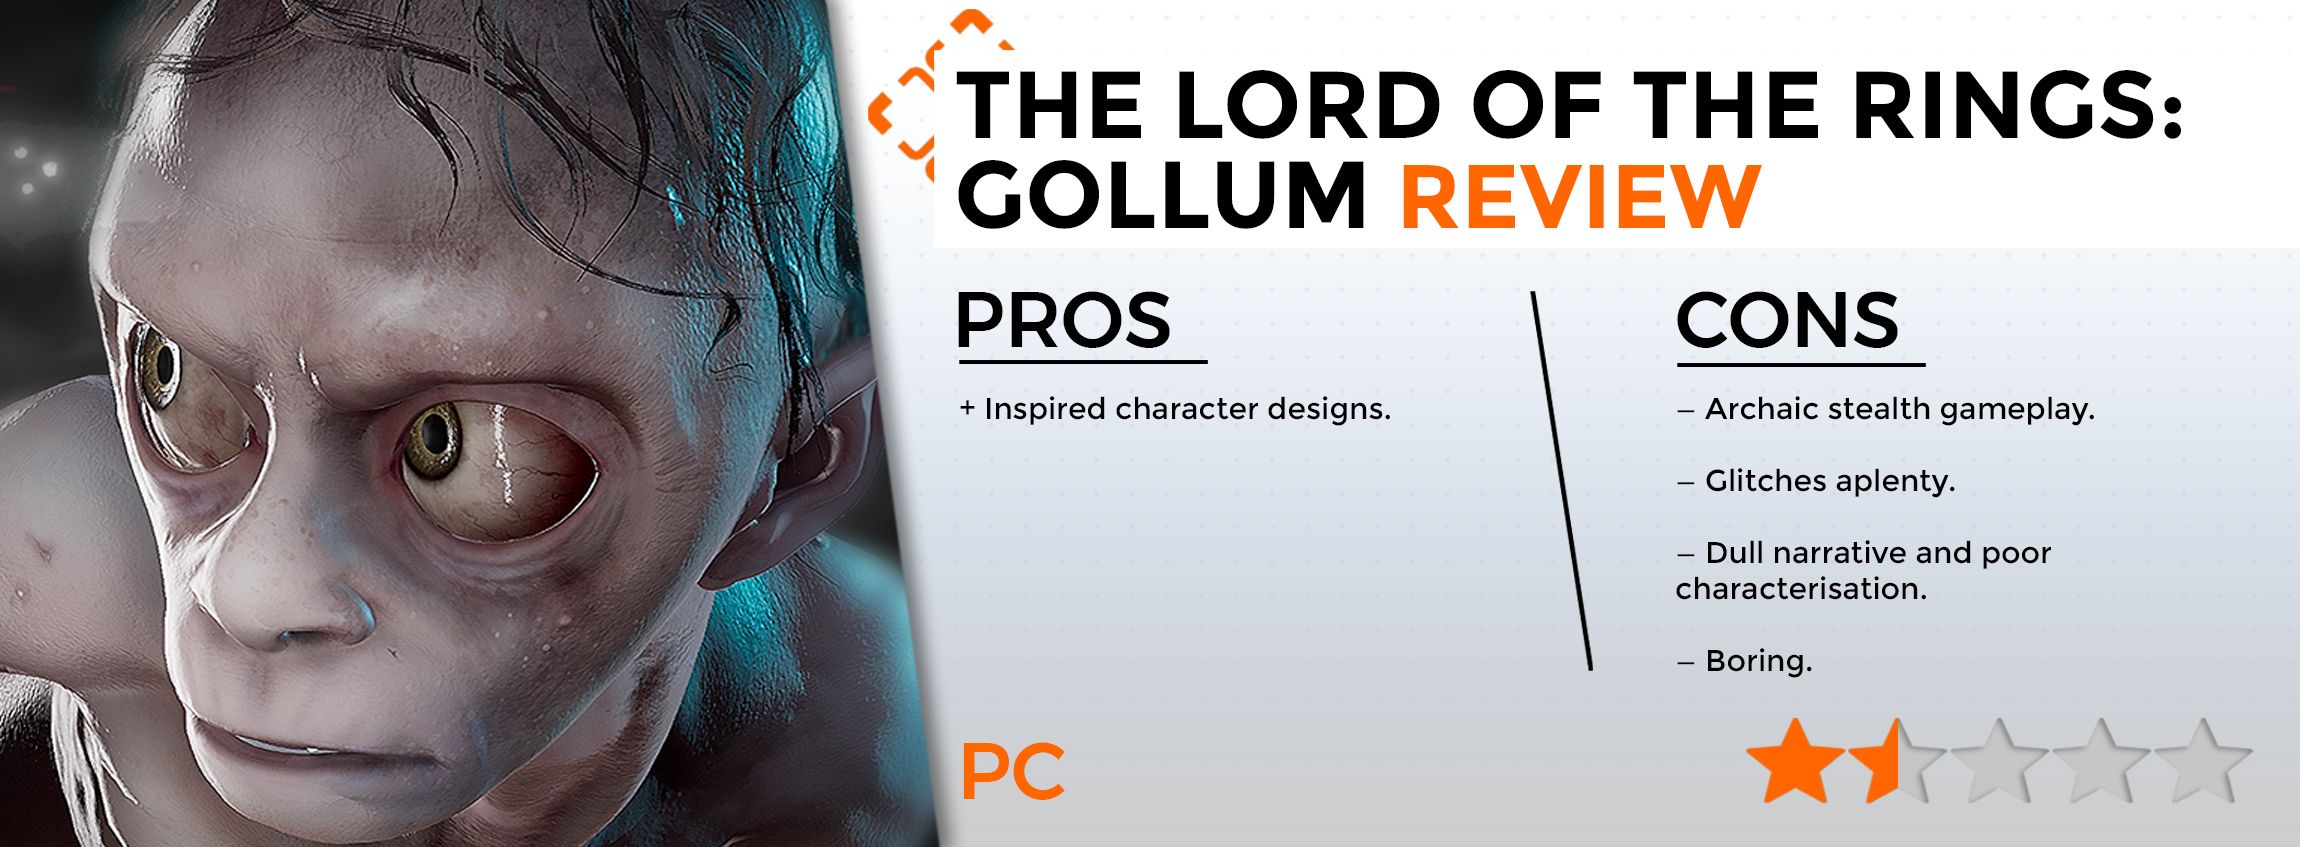 The Lord of the Rings Gollum Review Scorecard-1